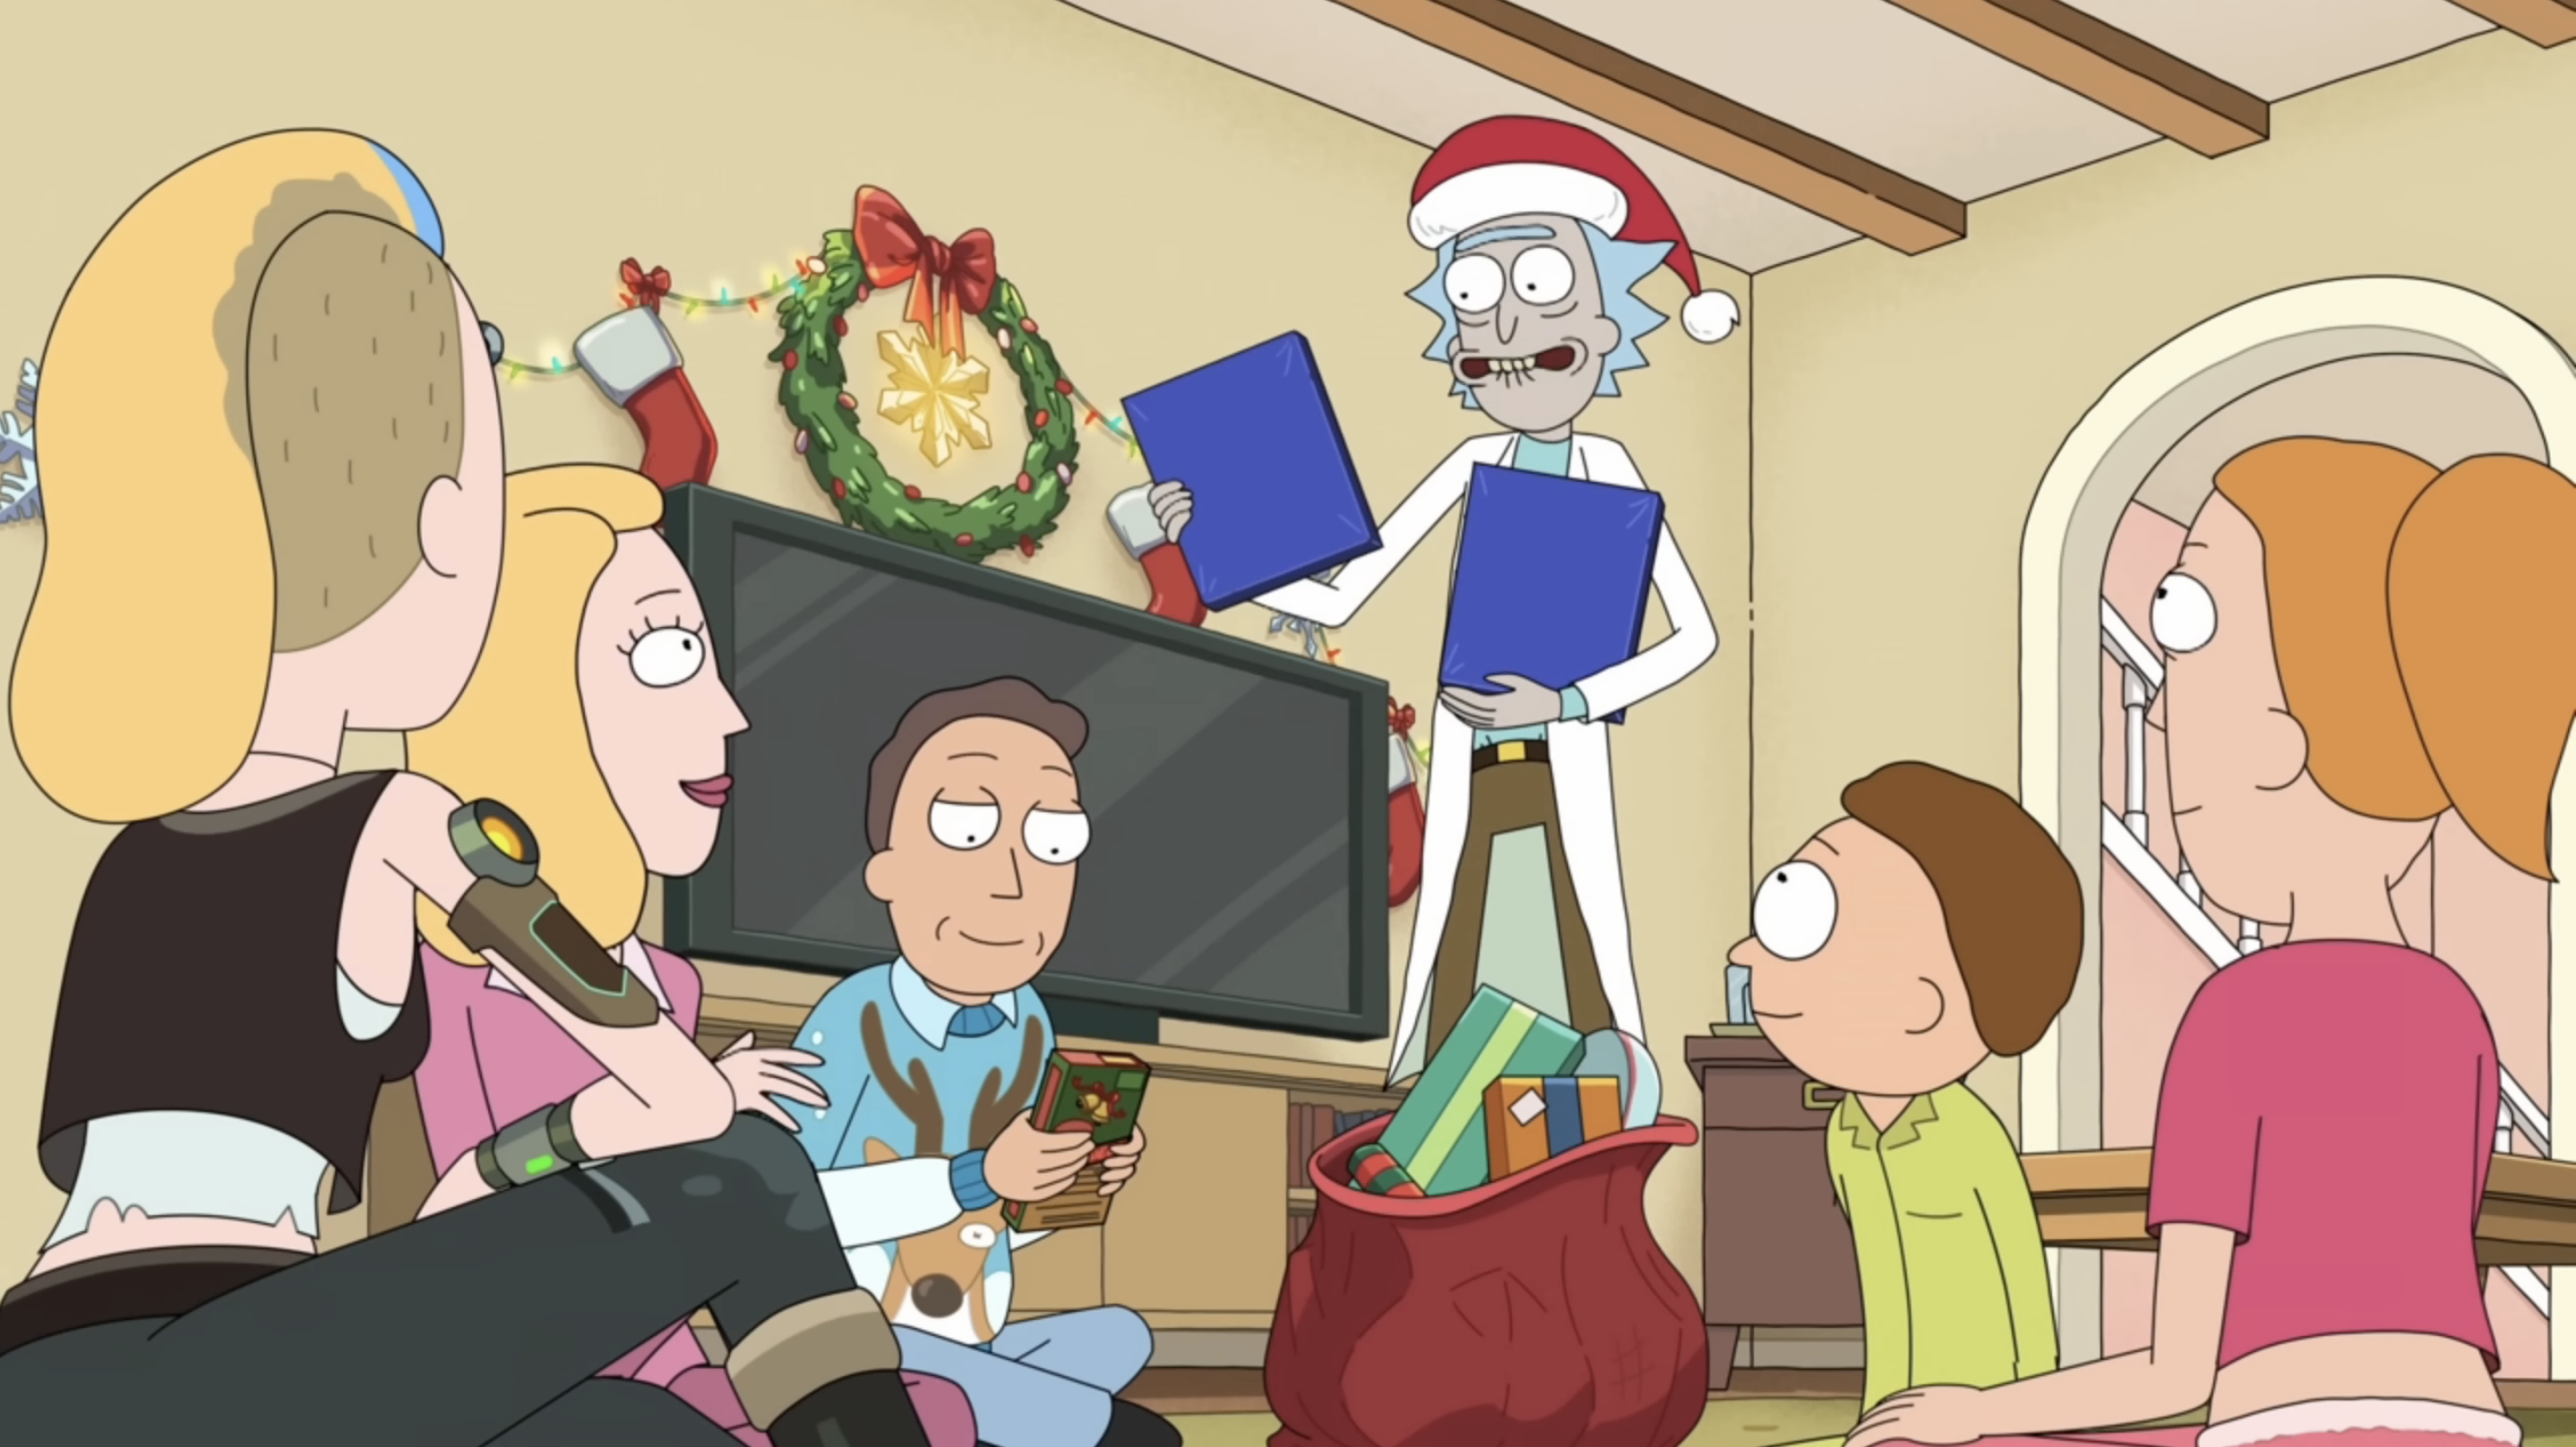 Rick and Morty Season 7 Episode 10 Streaming: How to Watch & Stream Online